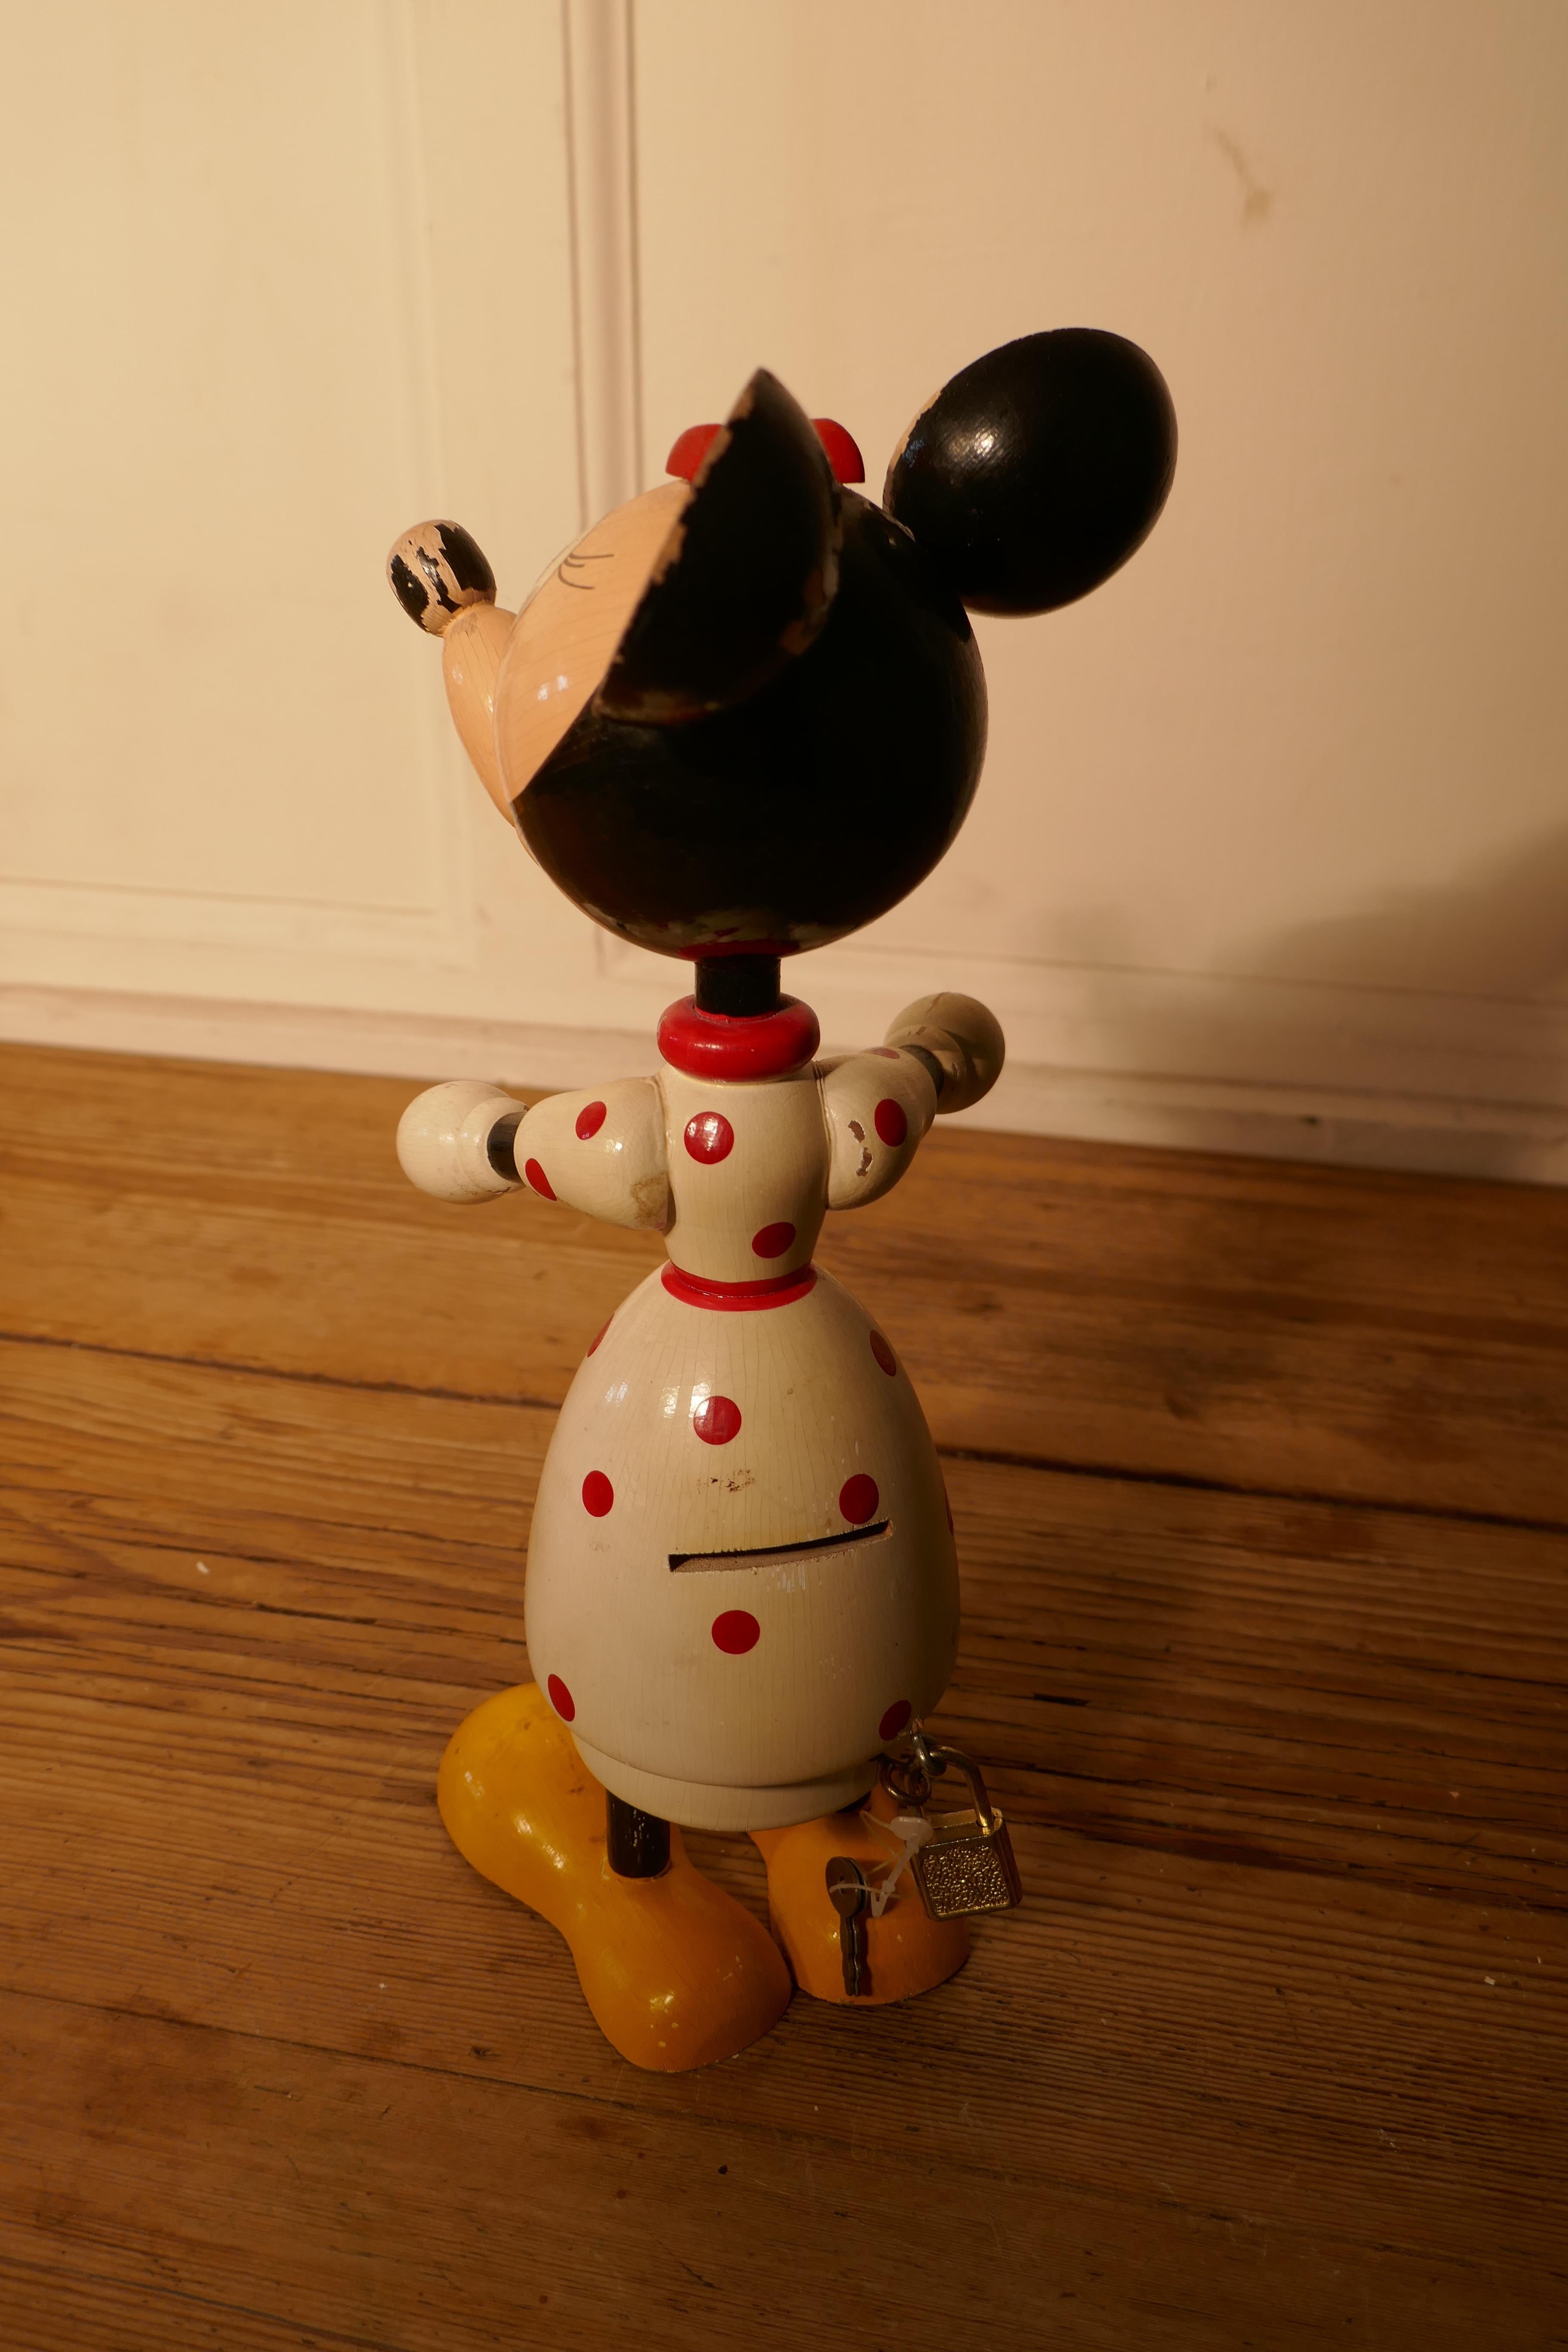 1950s wooden disney mini mouse money box

A rare collectable from circa 1950, with a coin slot in her back 
This very desirable money box opens in the middle it is locked by means of a tiny pad lock
The condition is sound with minor wear to the